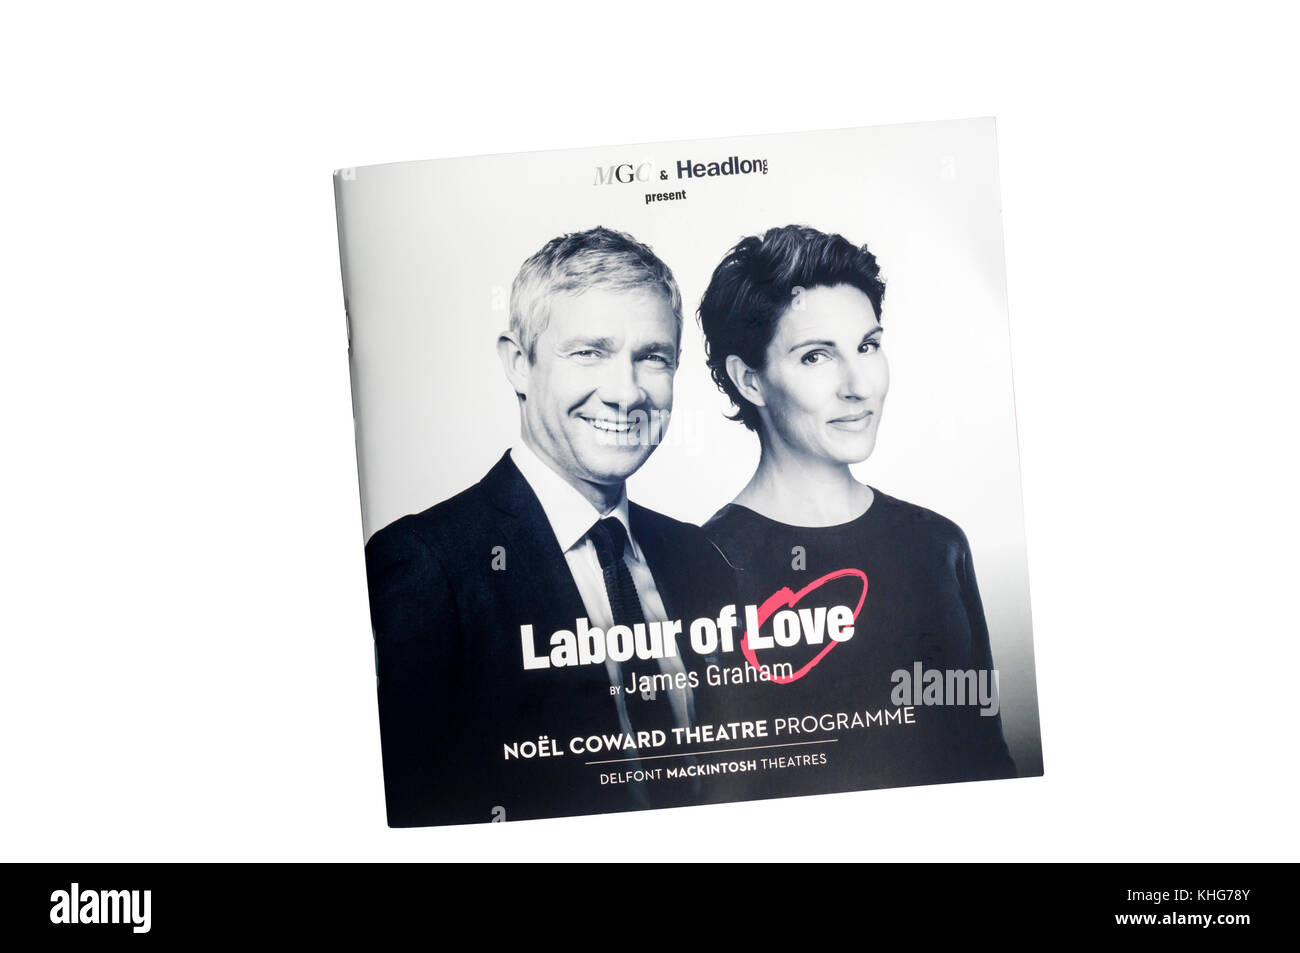 Programme for the 2017 production of Labour of Love by James Graham, starring Martin Freeman and Tamsin Greig at the Noel Coward Theatre. Stock Photo